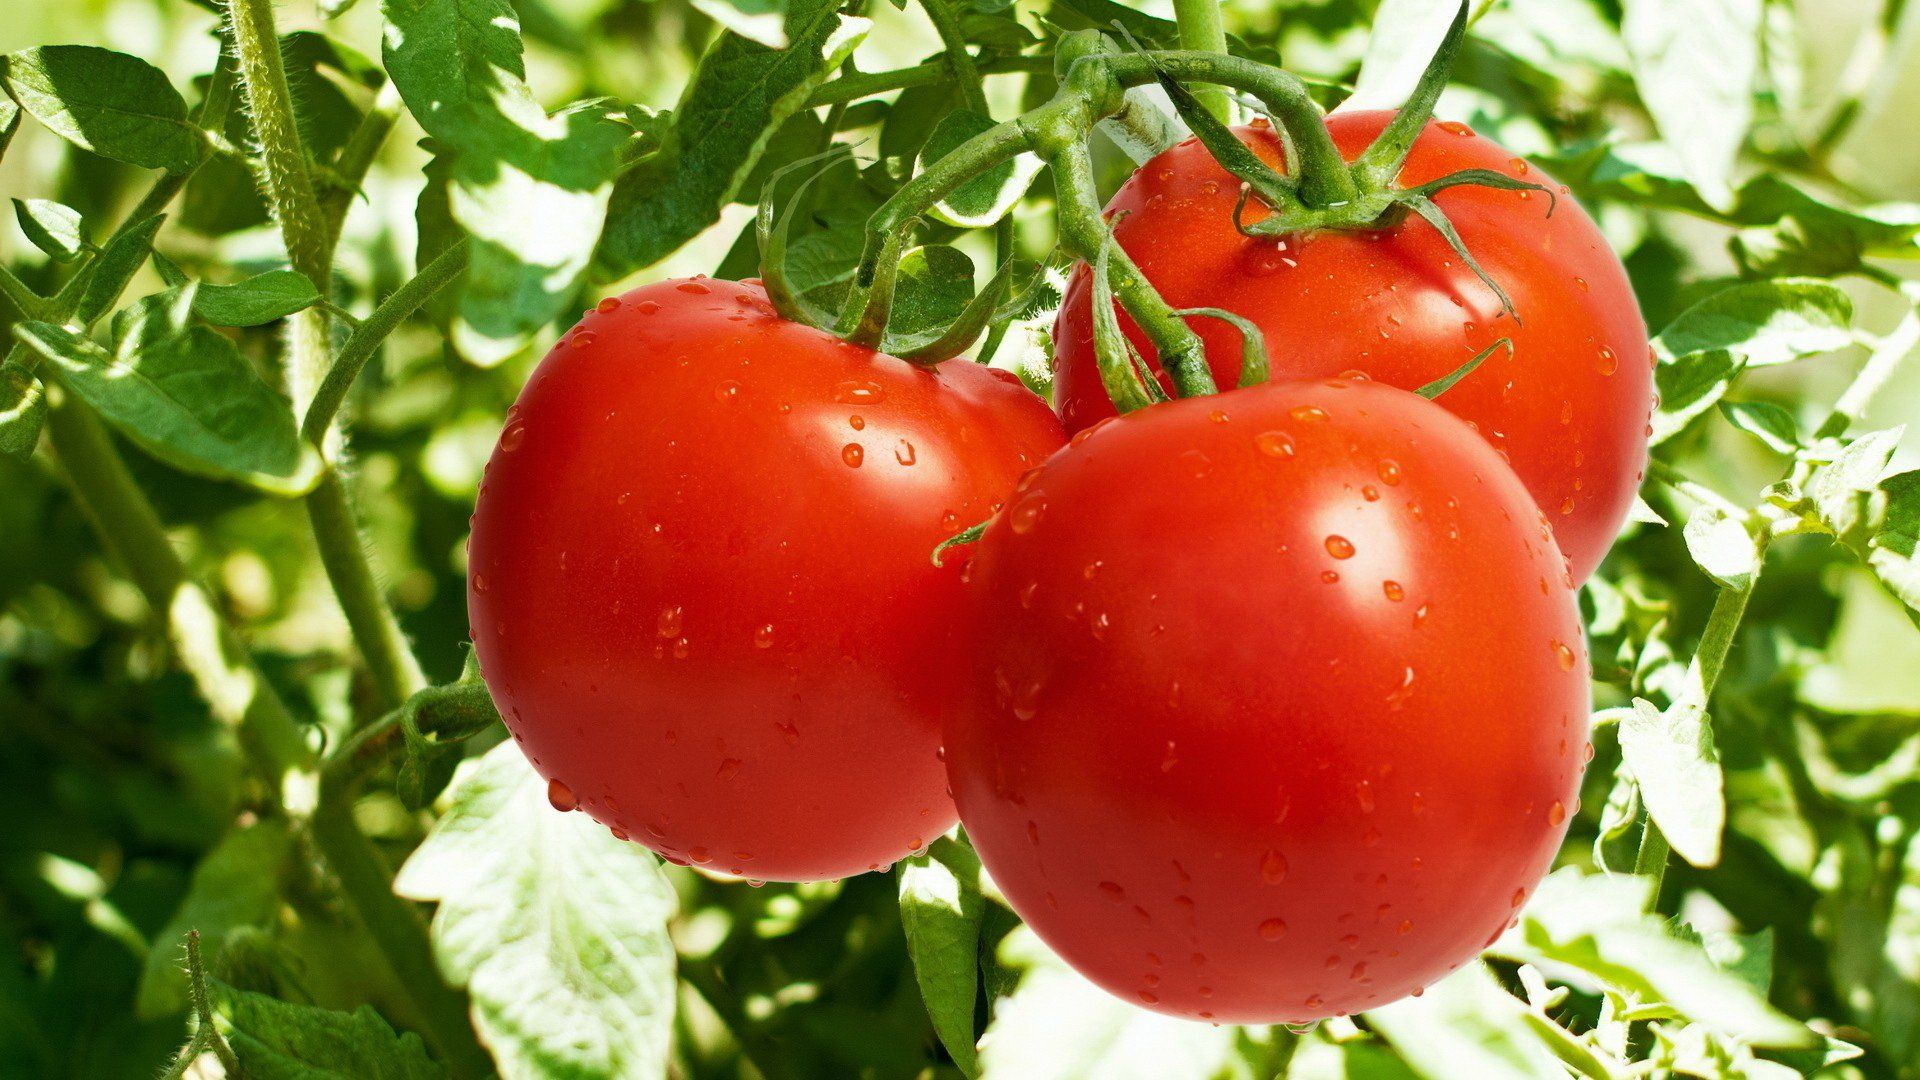 Method to cultivate tomatoes